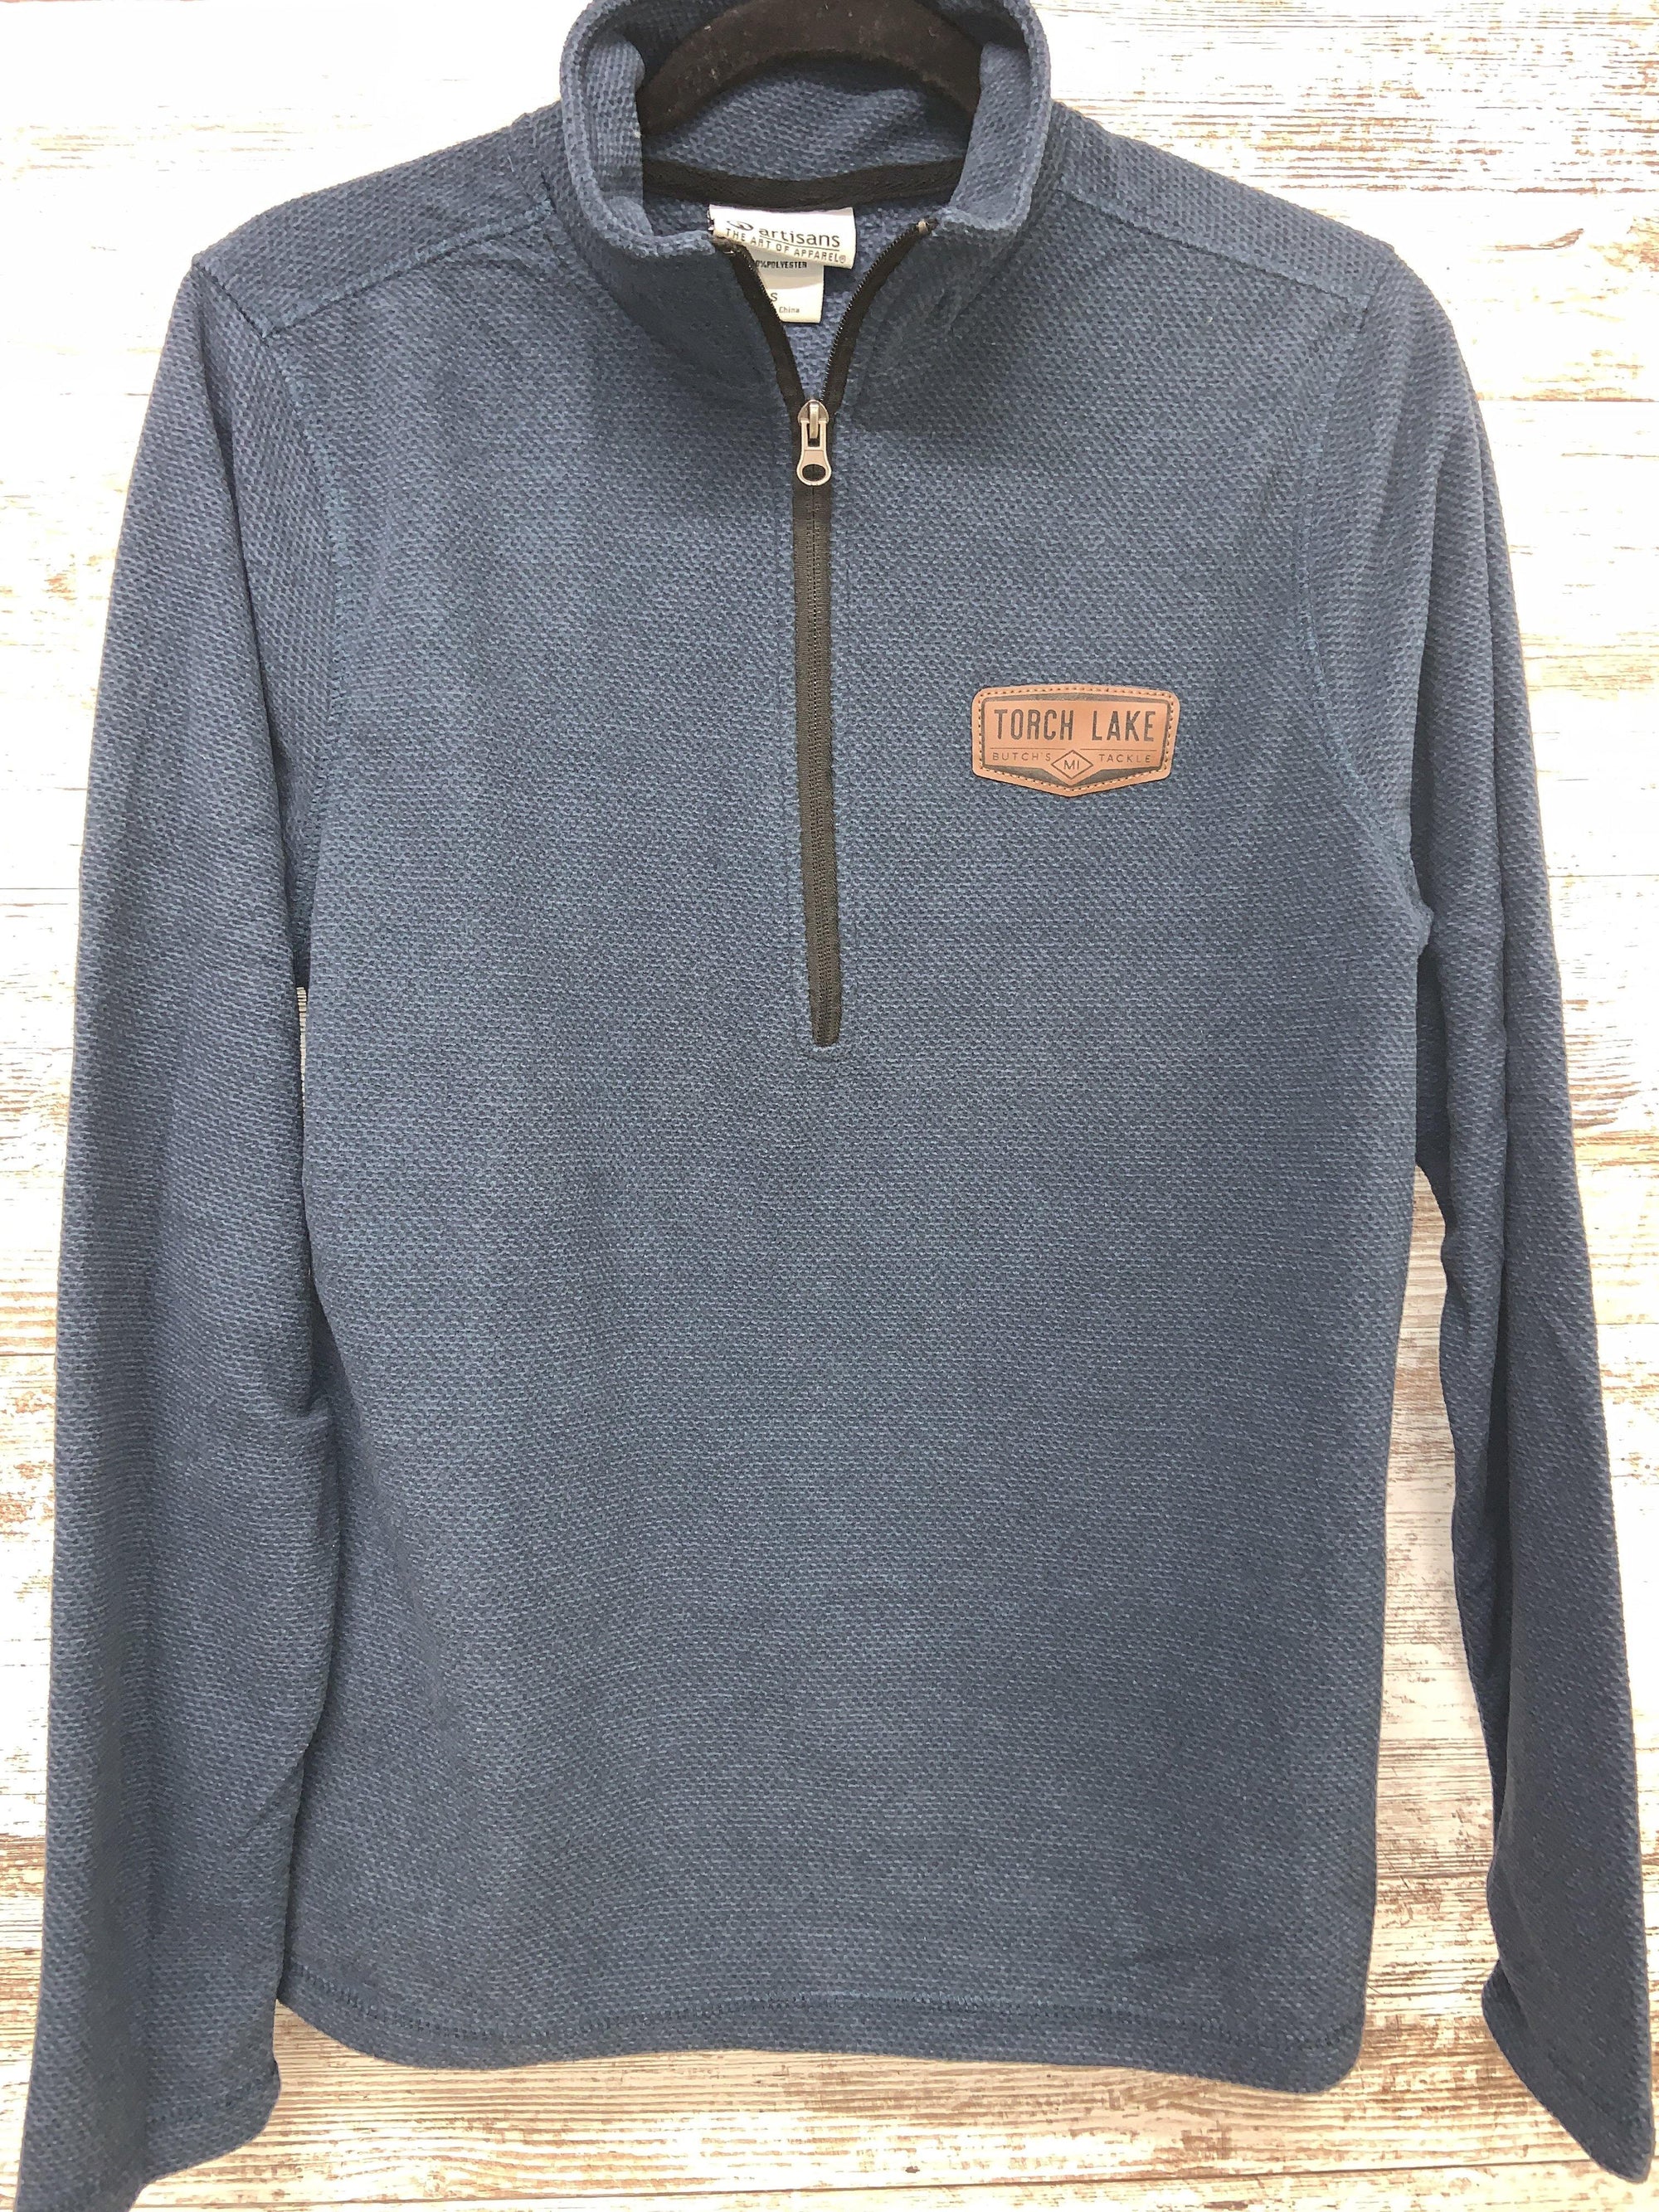 Lightweight Fleece Patched Pullover - Butch's Tackle & Marine - Pontoon Rentals on Torch Lake